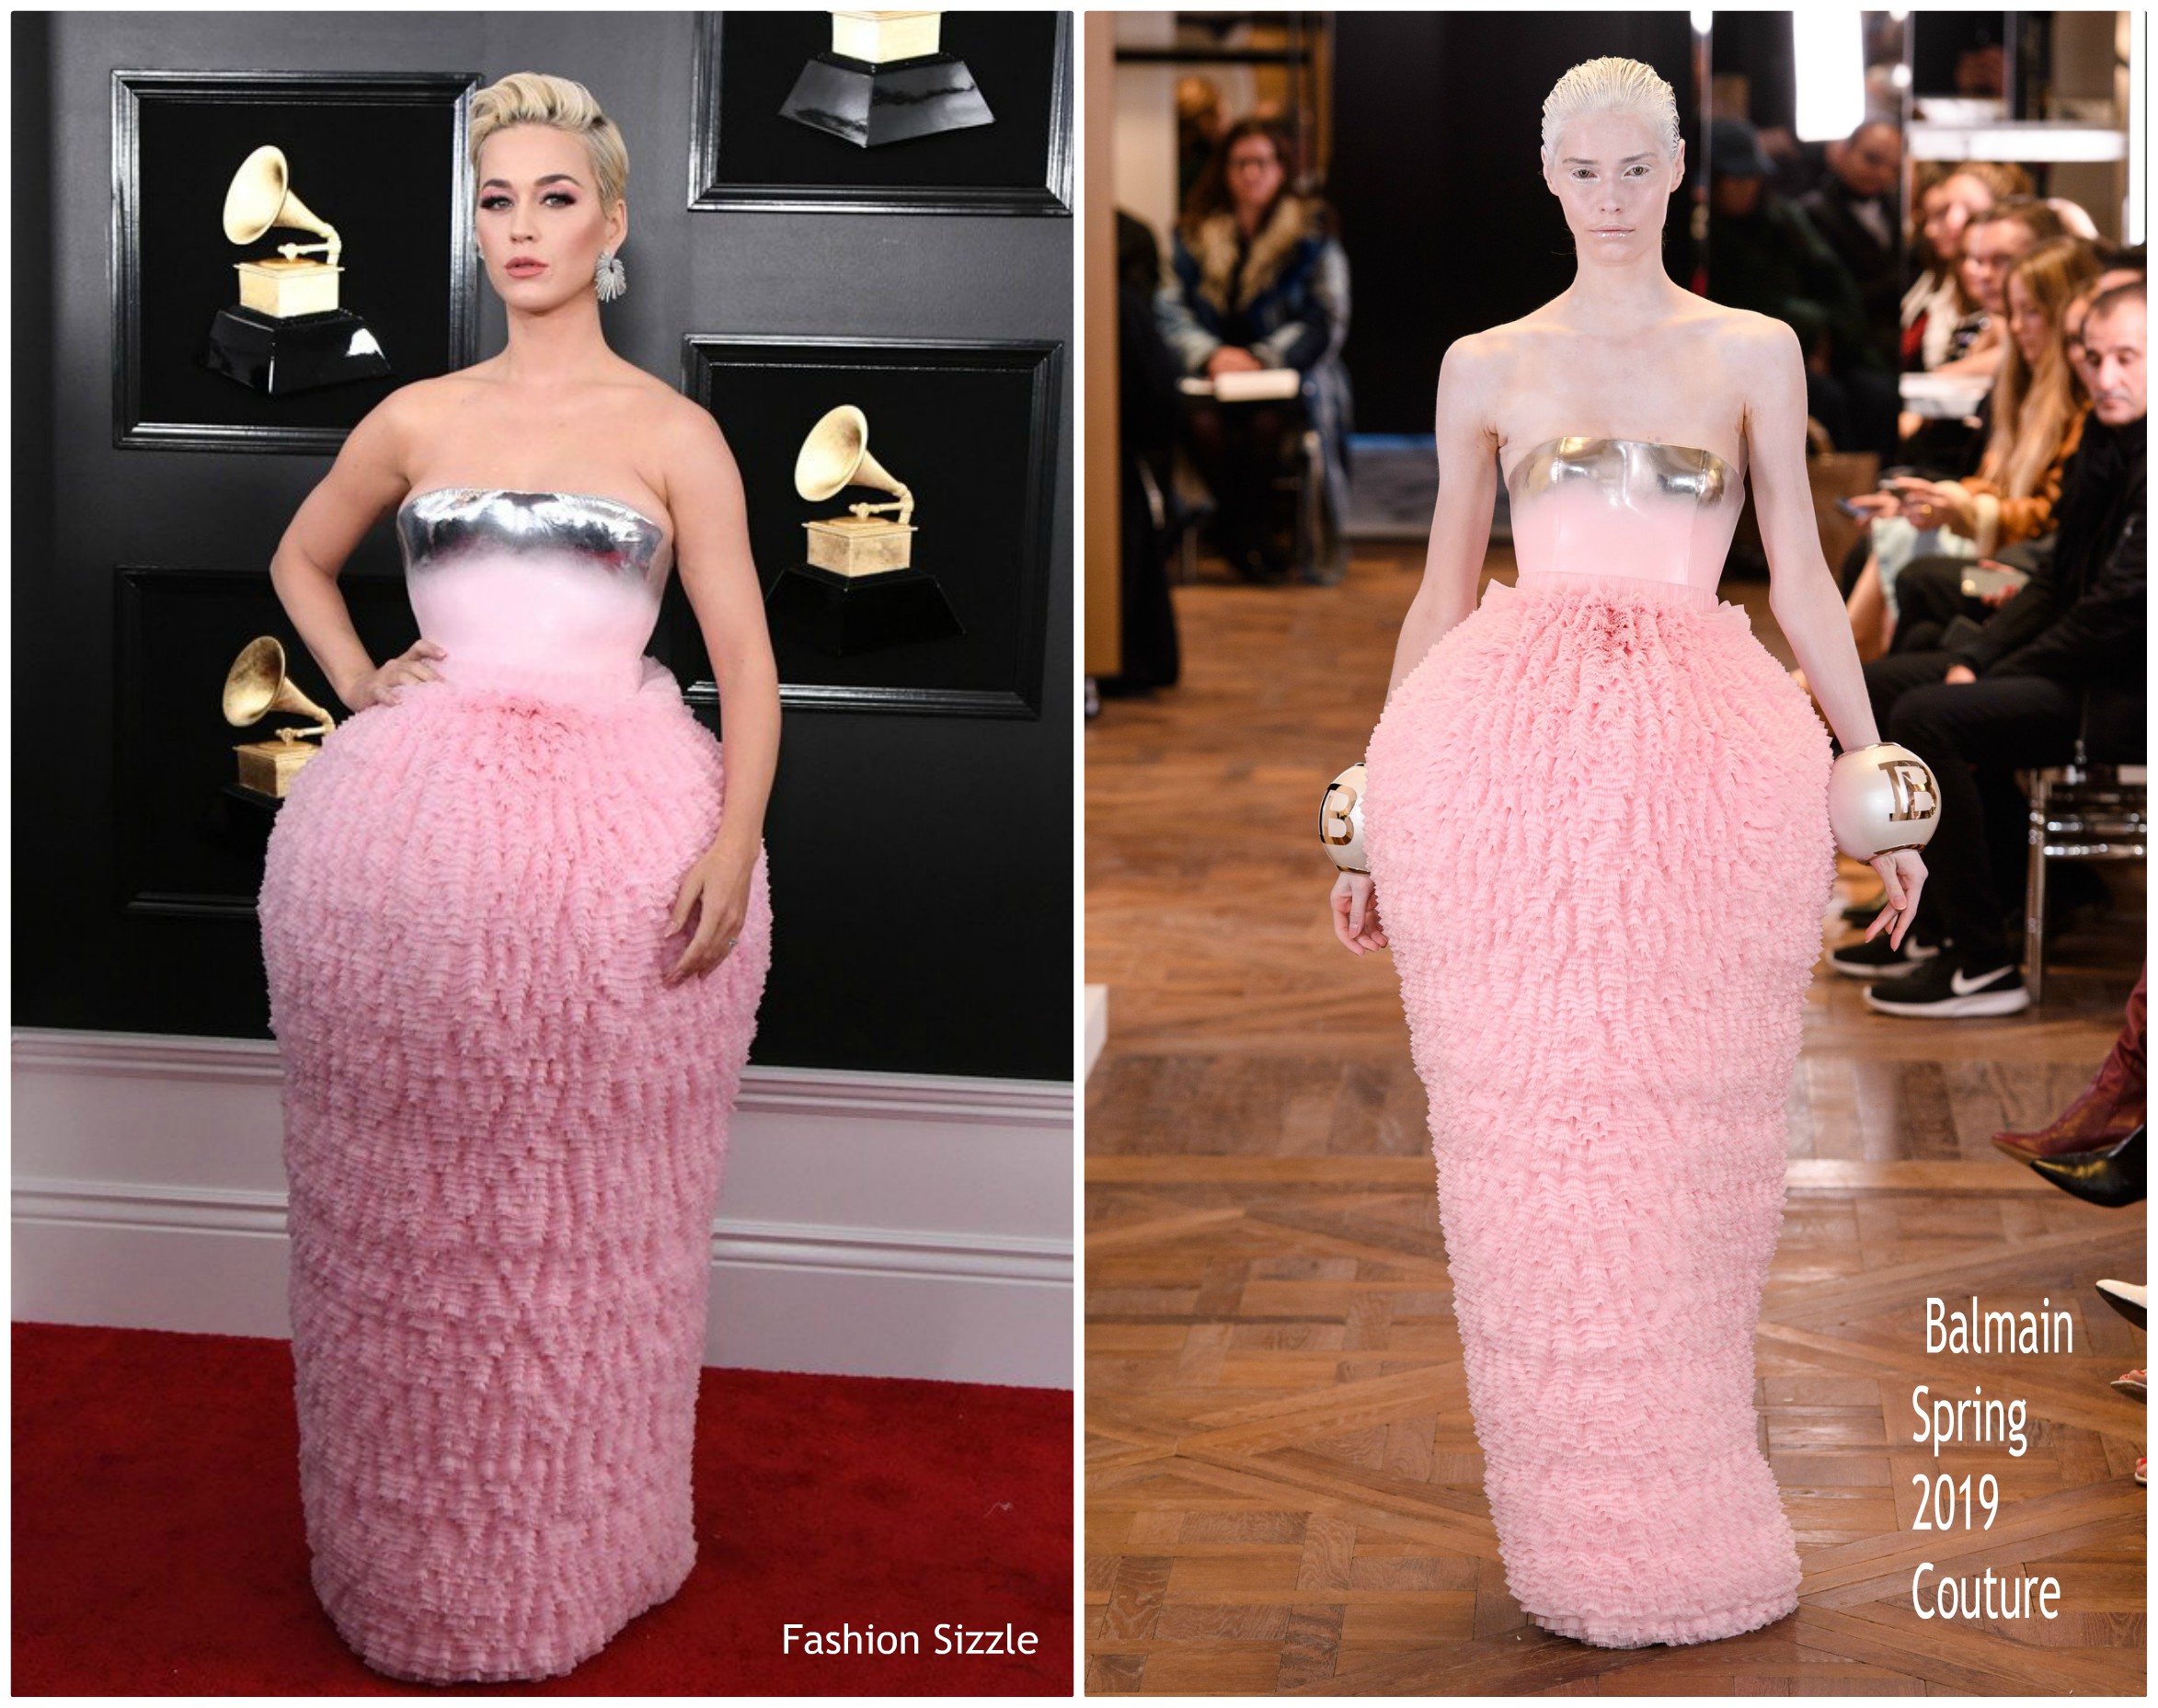 katy-perry-in-balmain-haute-couture-2019-grammy-awards